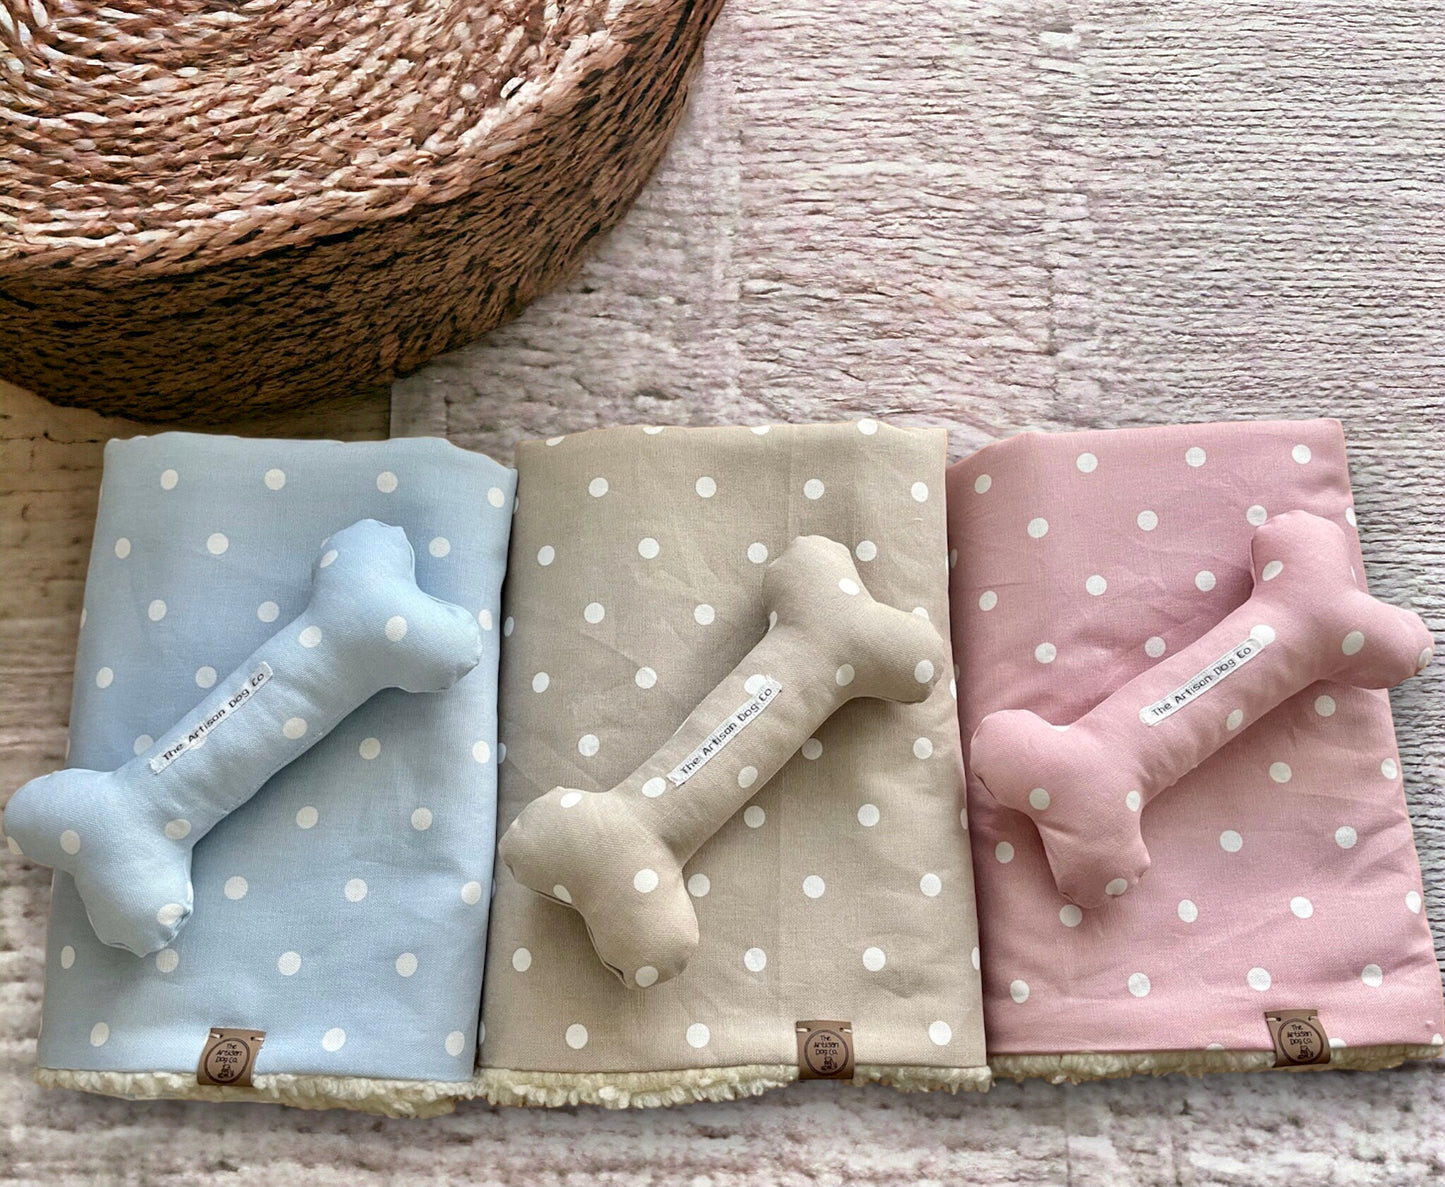 New Puppy Gift Set: Blanket, Pillow, Toy & Milestone Cards. Blue Spotty.